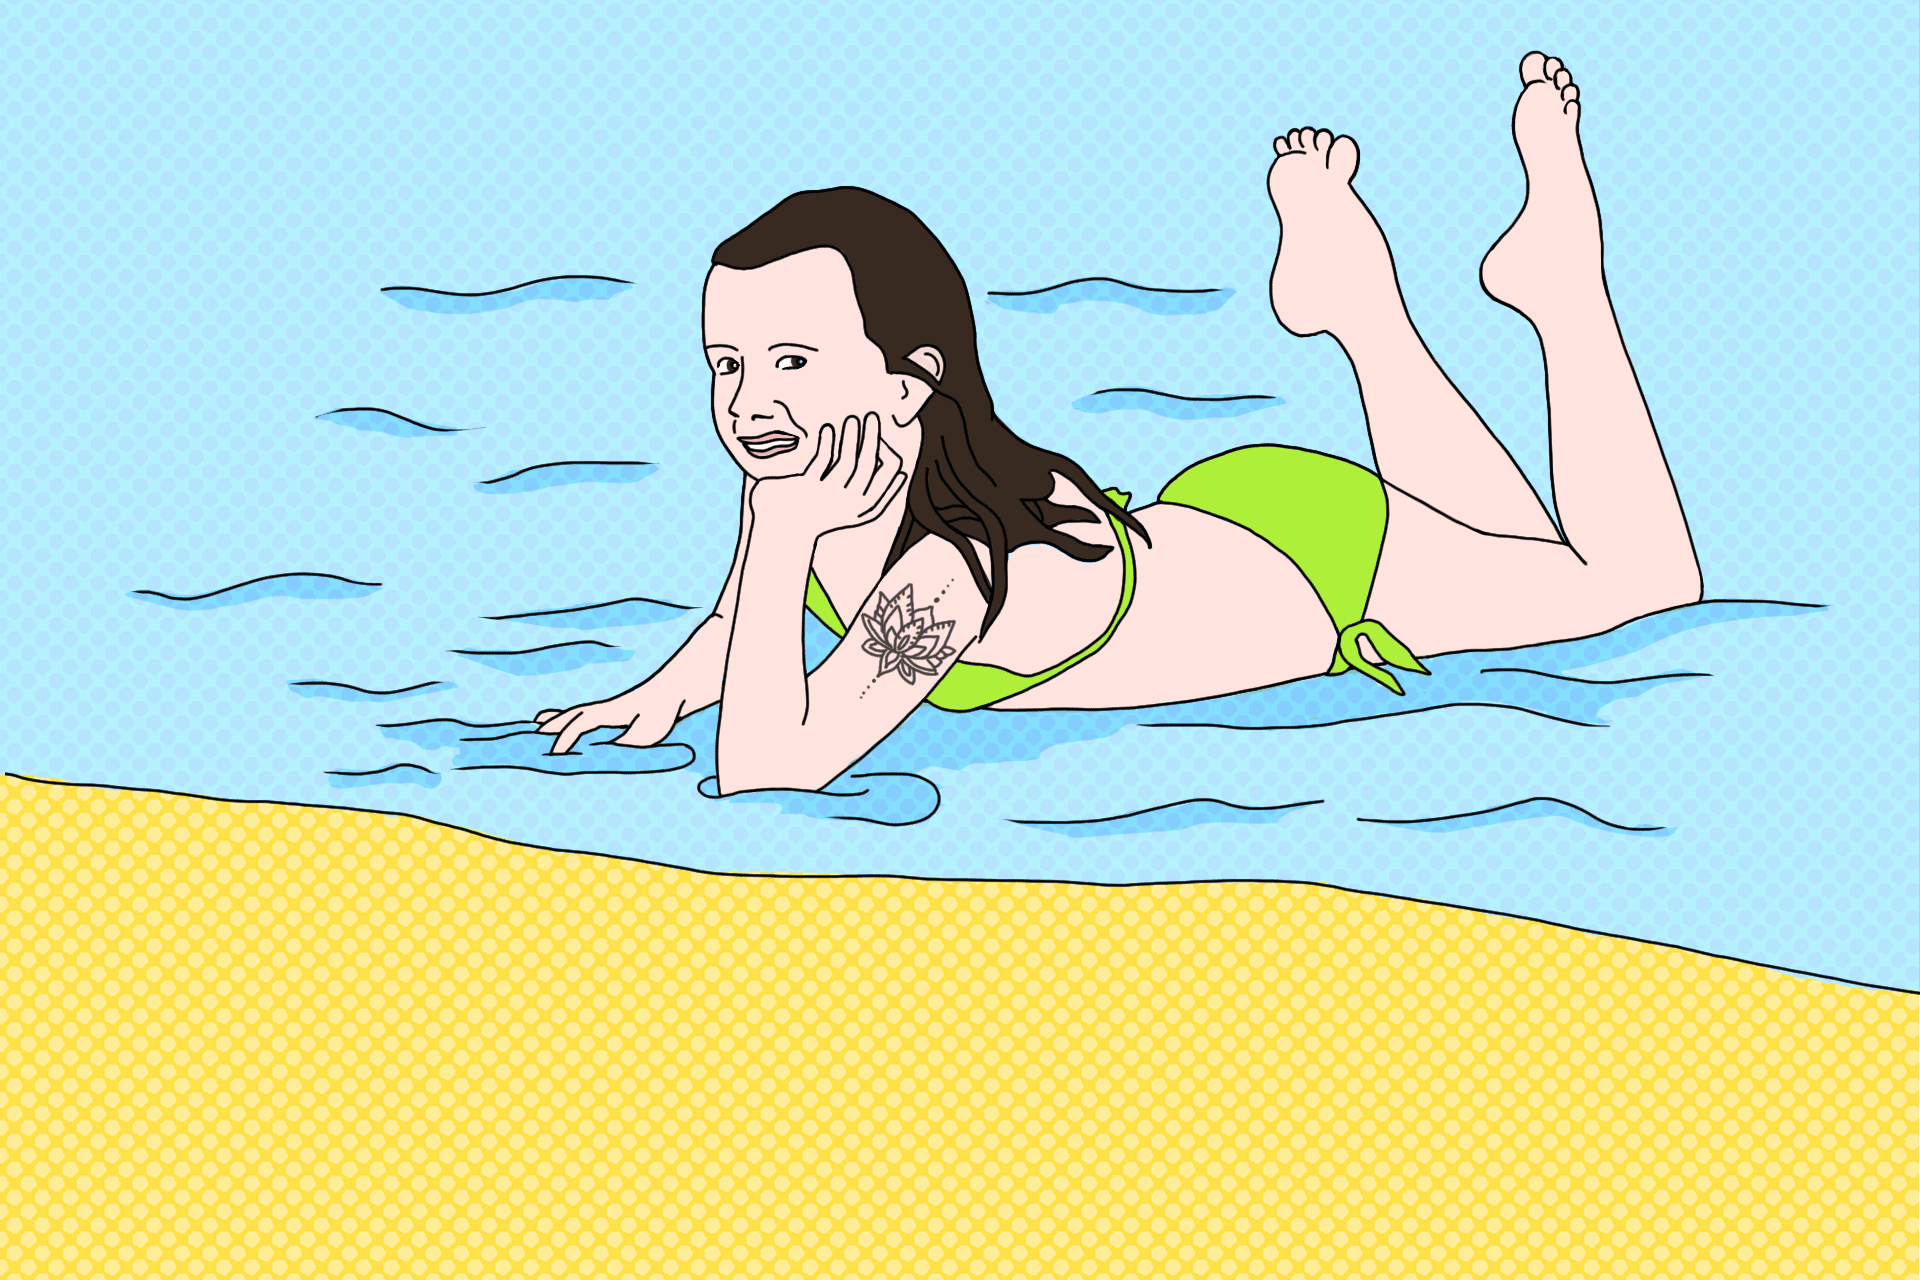 The illustration shows a girl lying at the beach. She has got a henna tattoo on her upper arm.